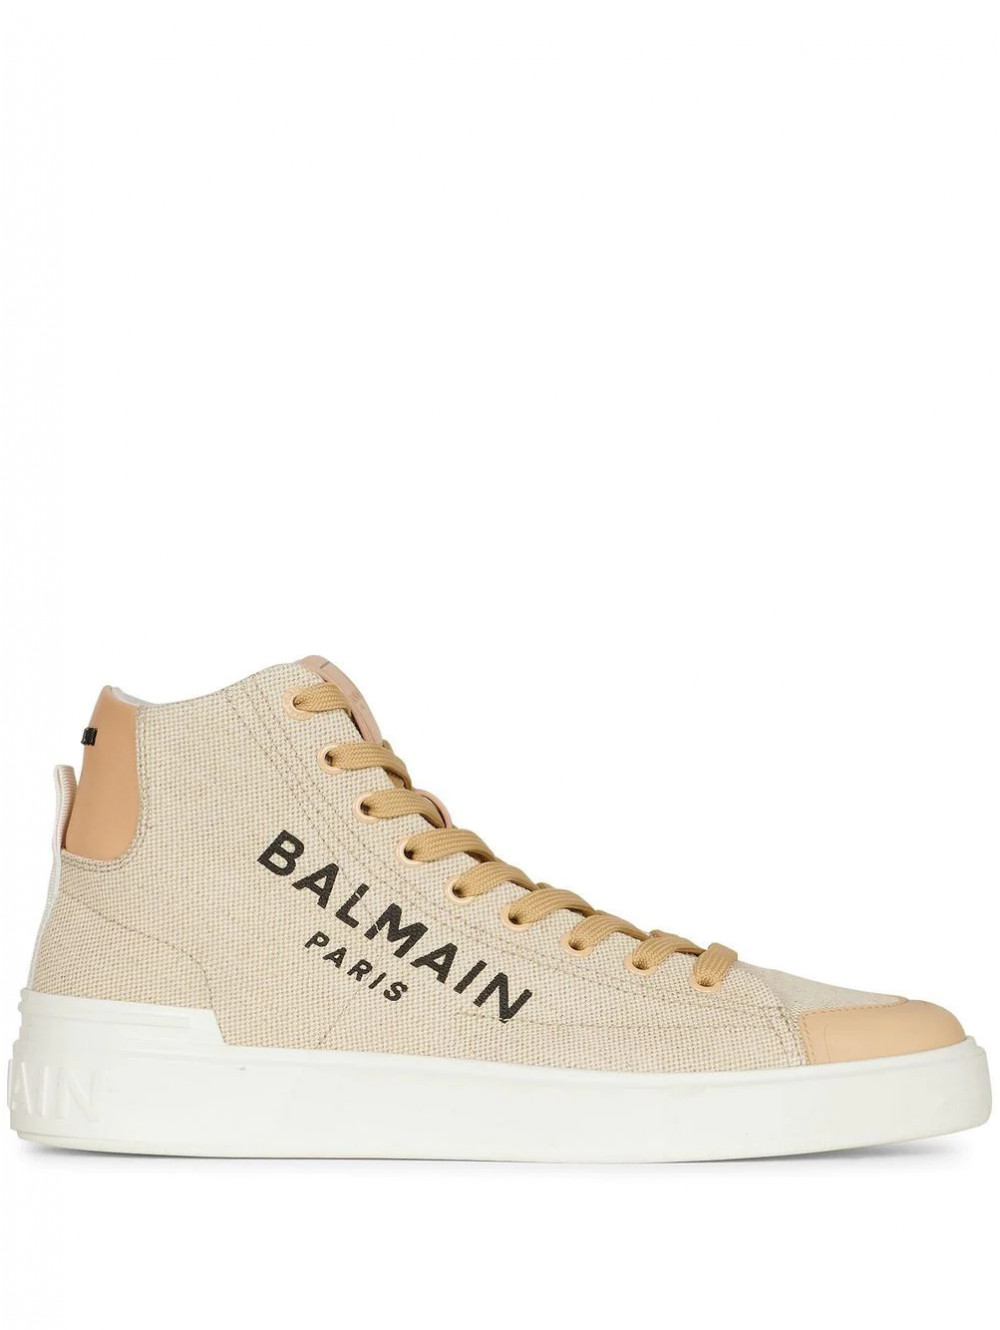 B court high top sneakers